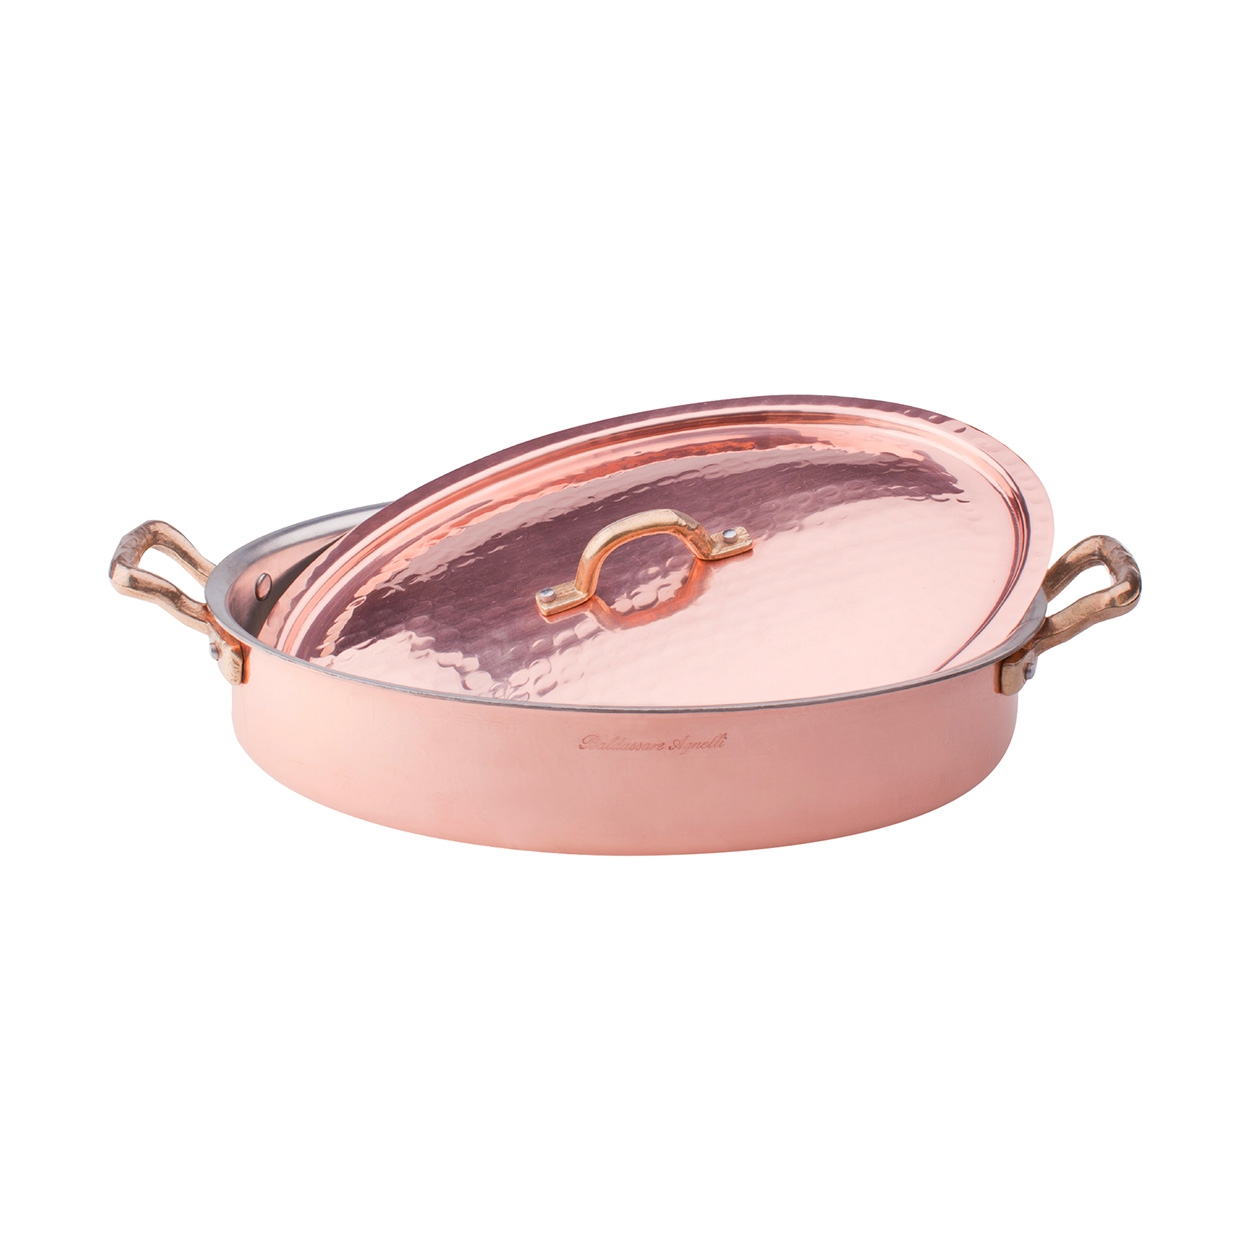 Rame Martellato Stagnato A Mano - Oval omelette pan with lid 30cm